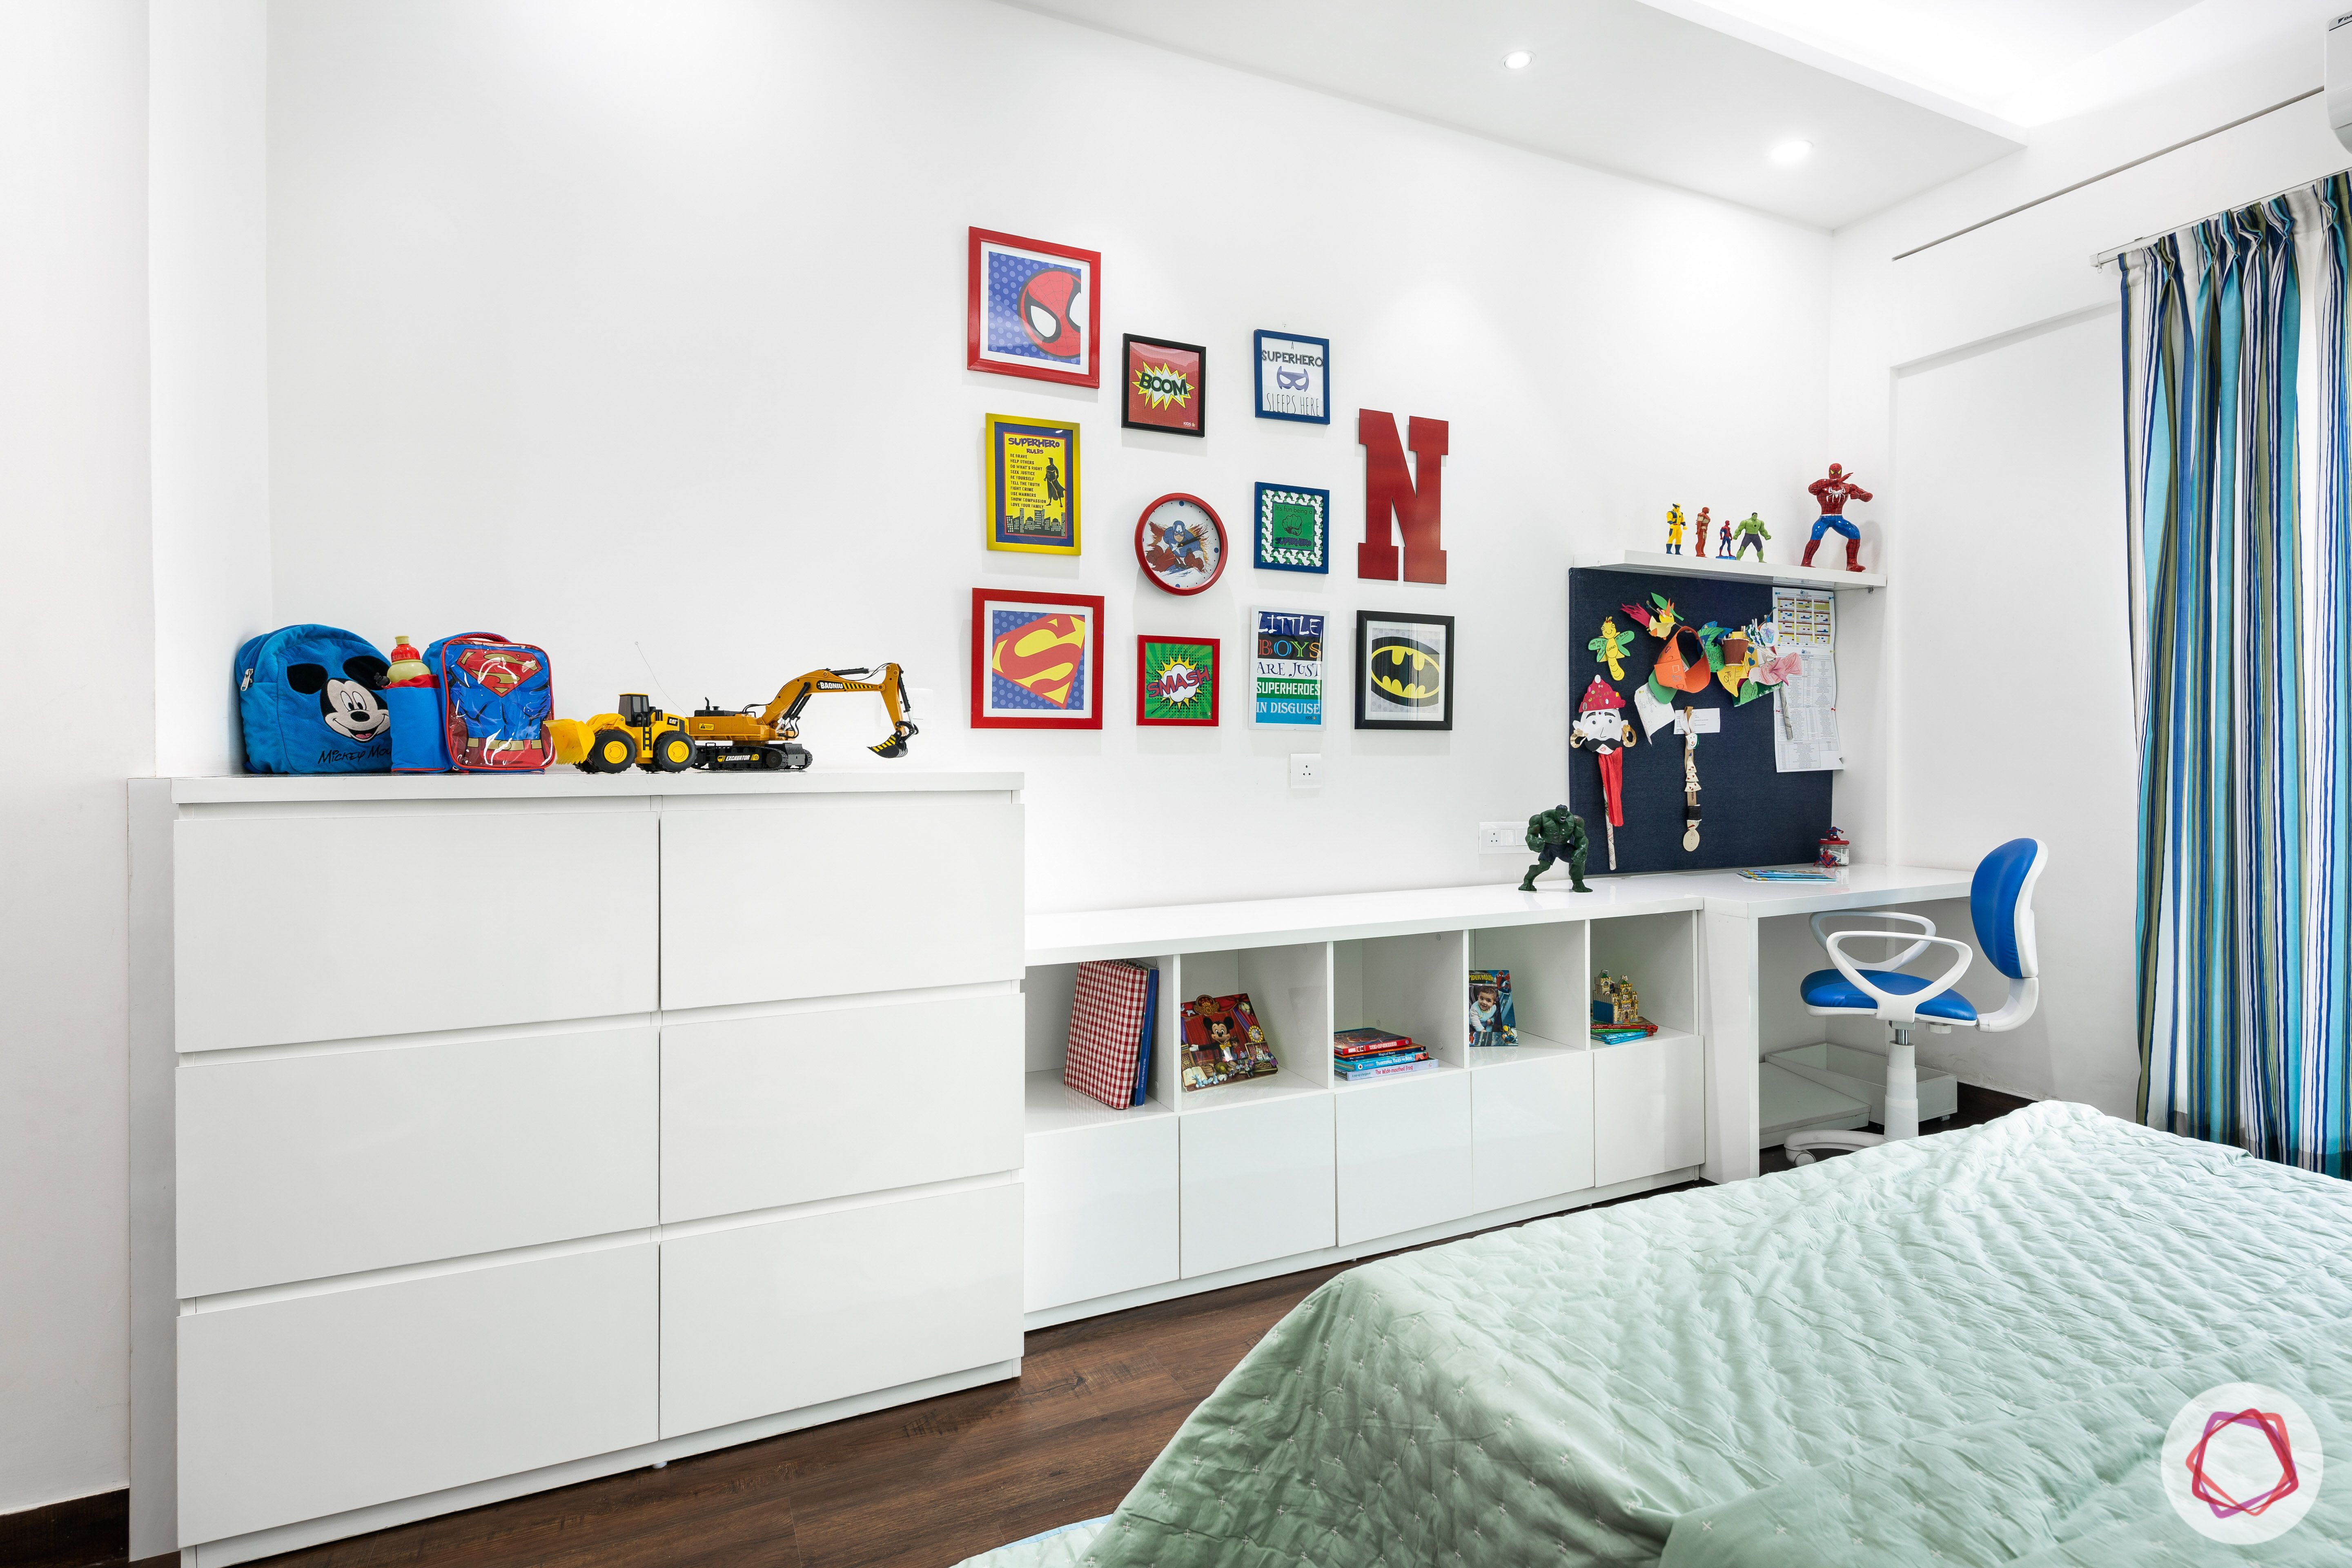 gallery wall ideas-gallery wall ideas for kids room
